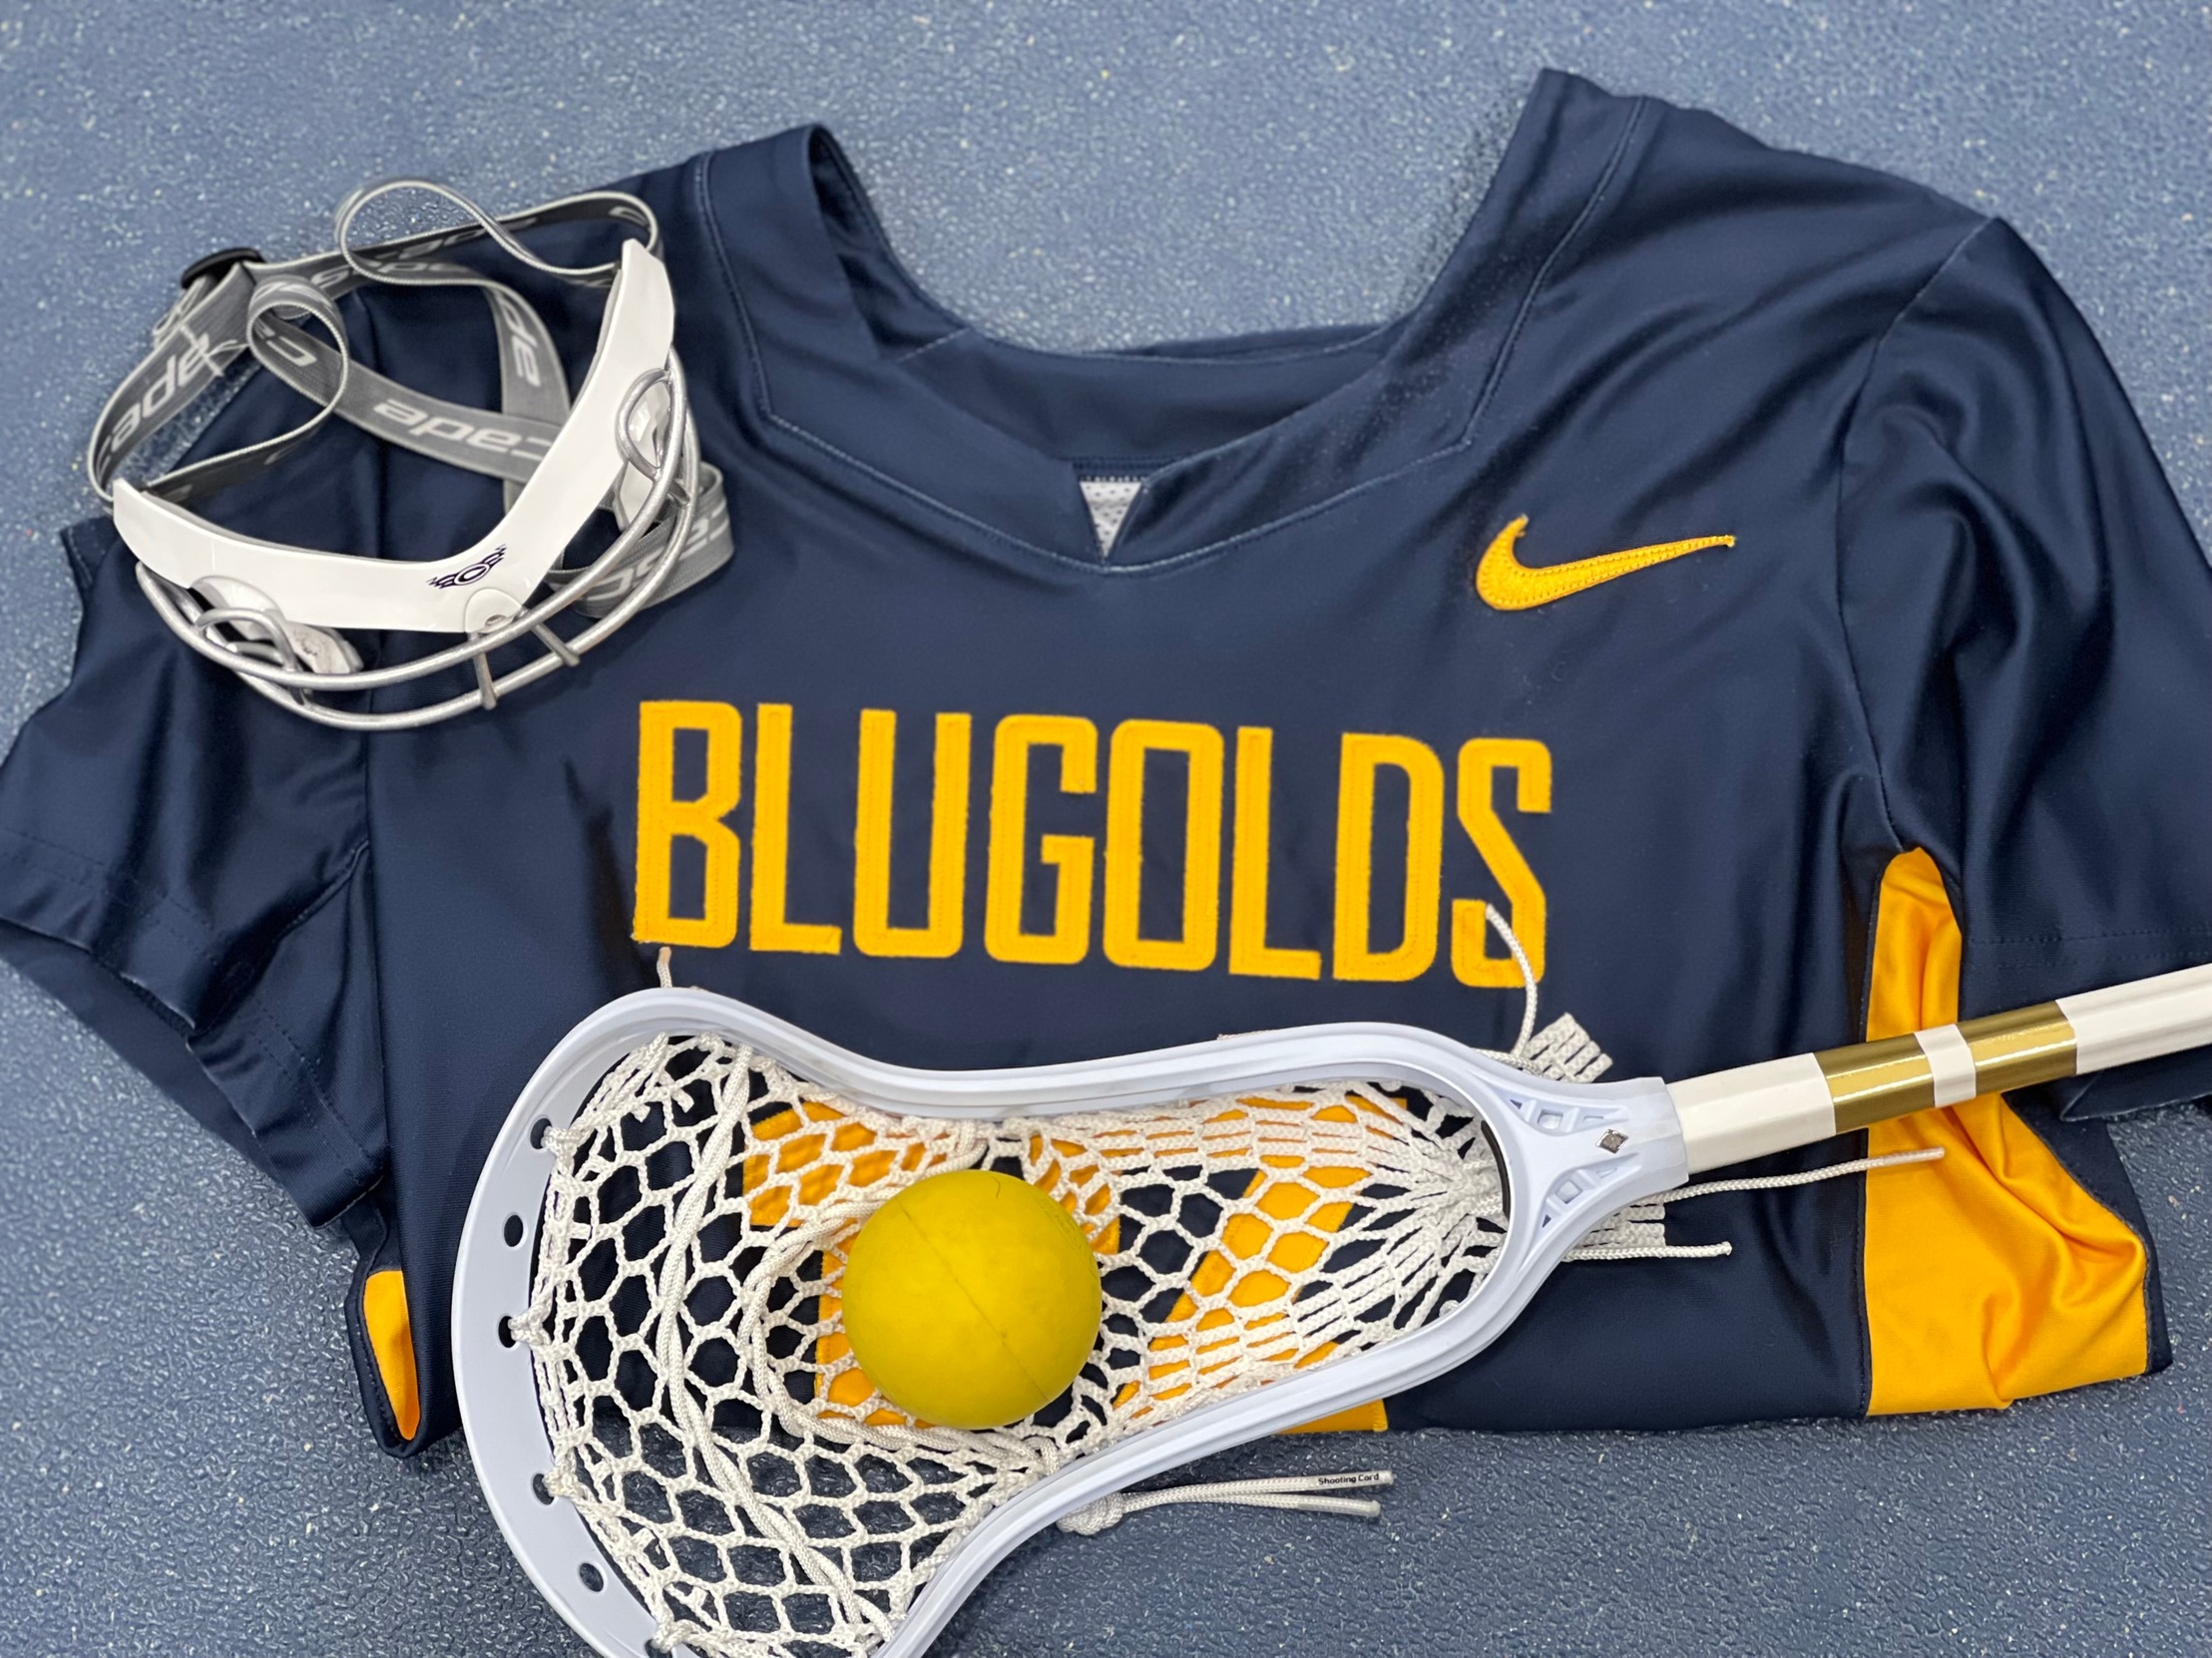 Burns & Romanelli lead Women's Lacrosse in home opener as Blugolds improve to 6-0